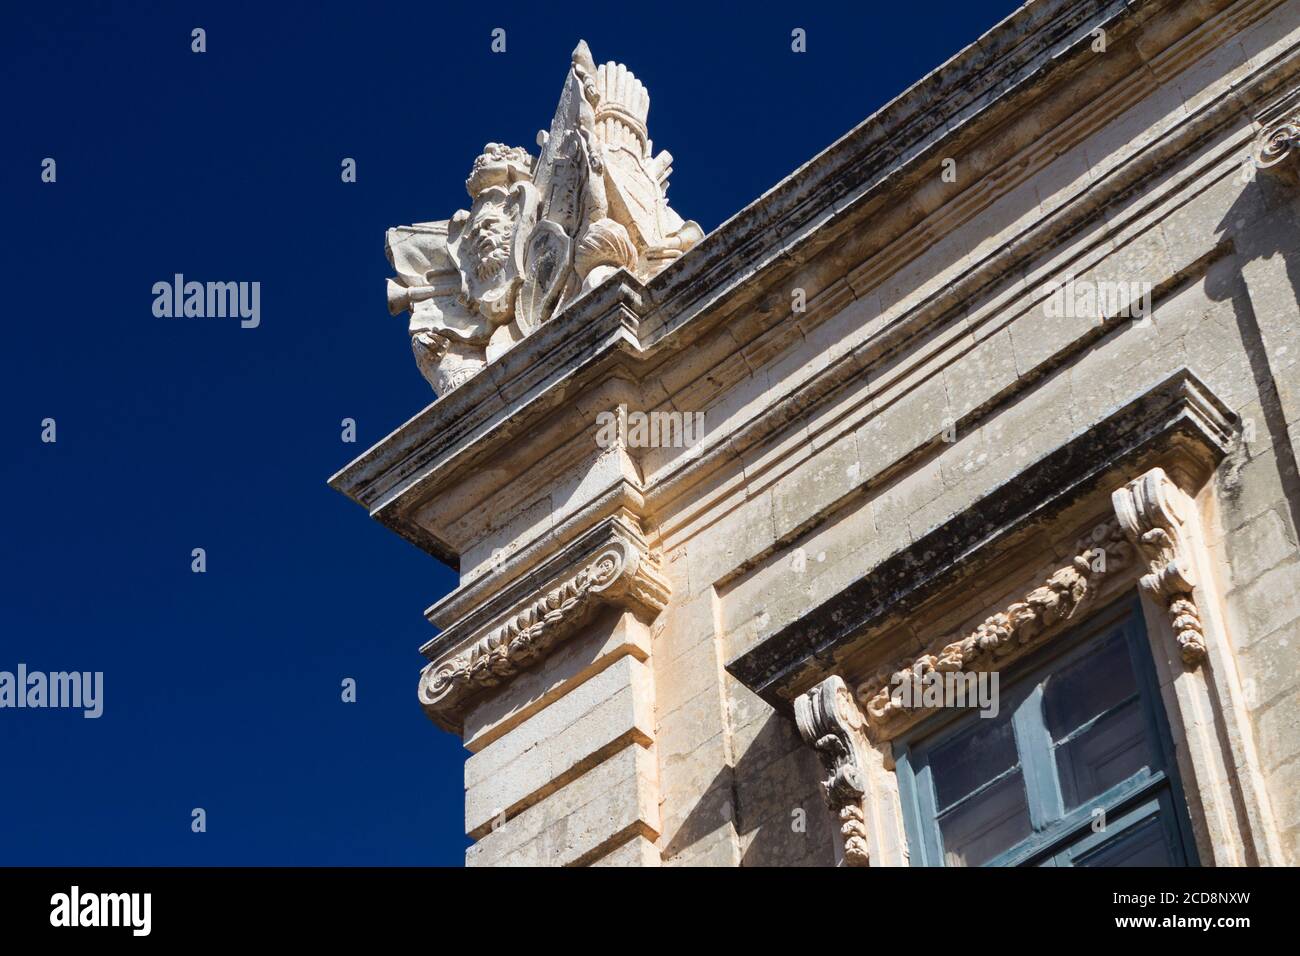 Architectonic details of ancient building in Mdina, Malta Stock Photo